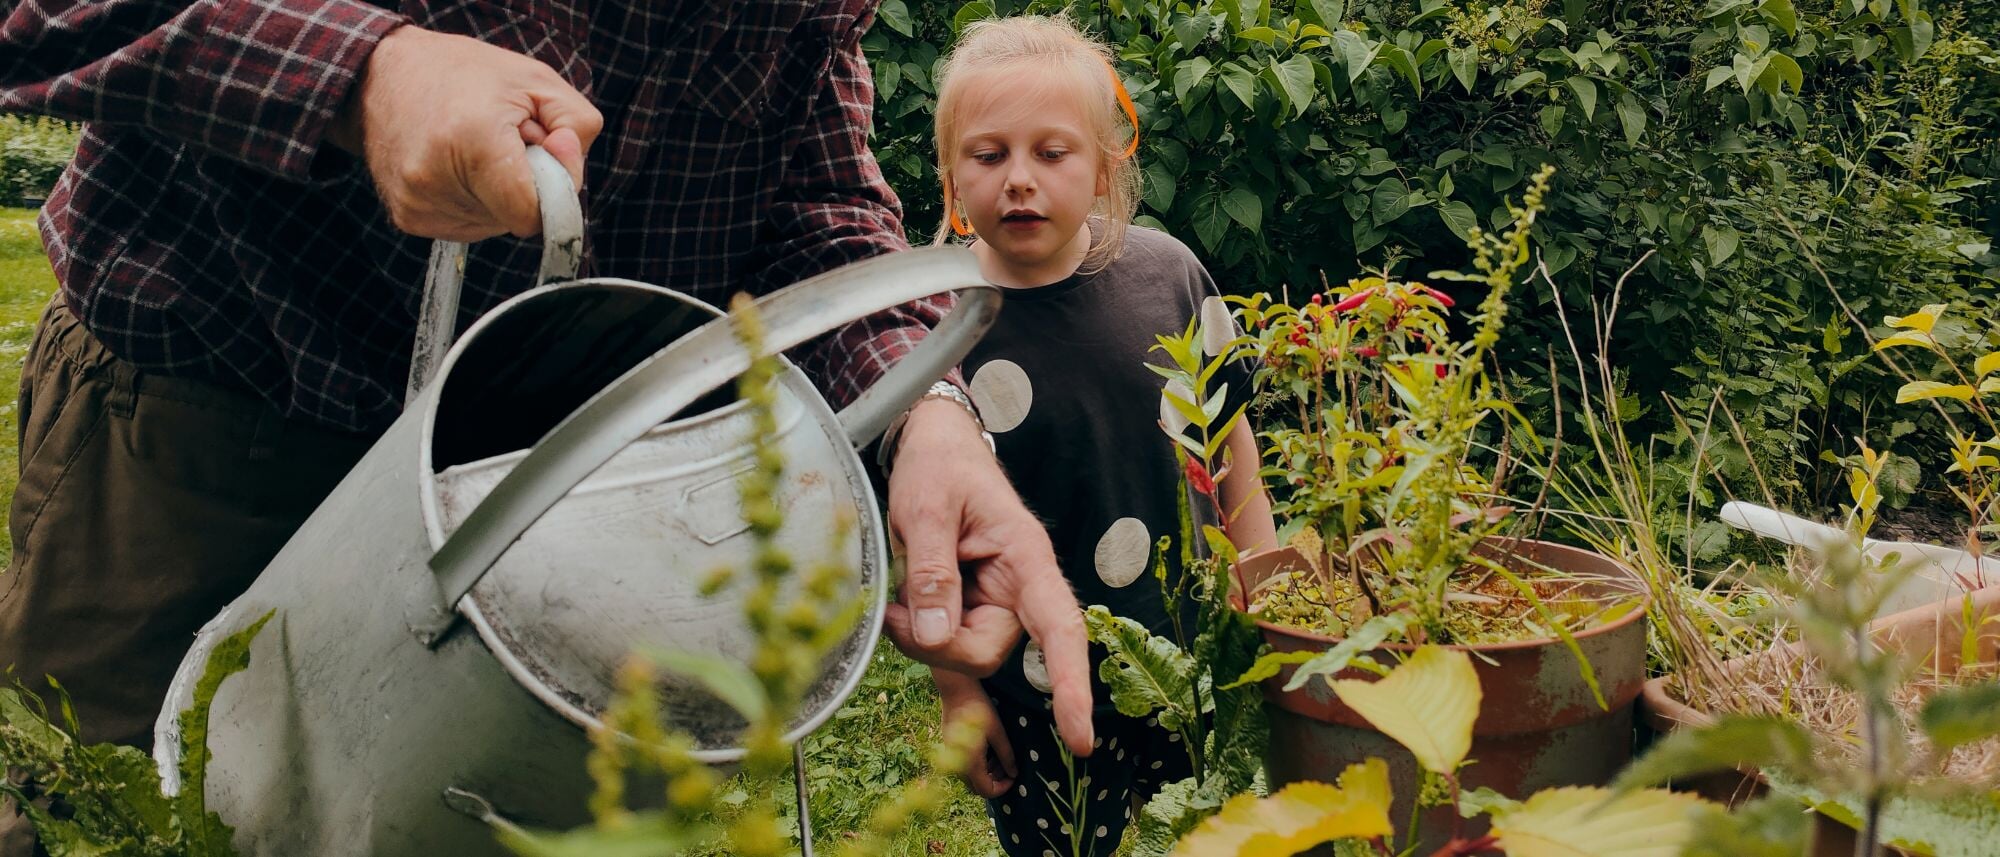 Child looking at popular plants in the garden